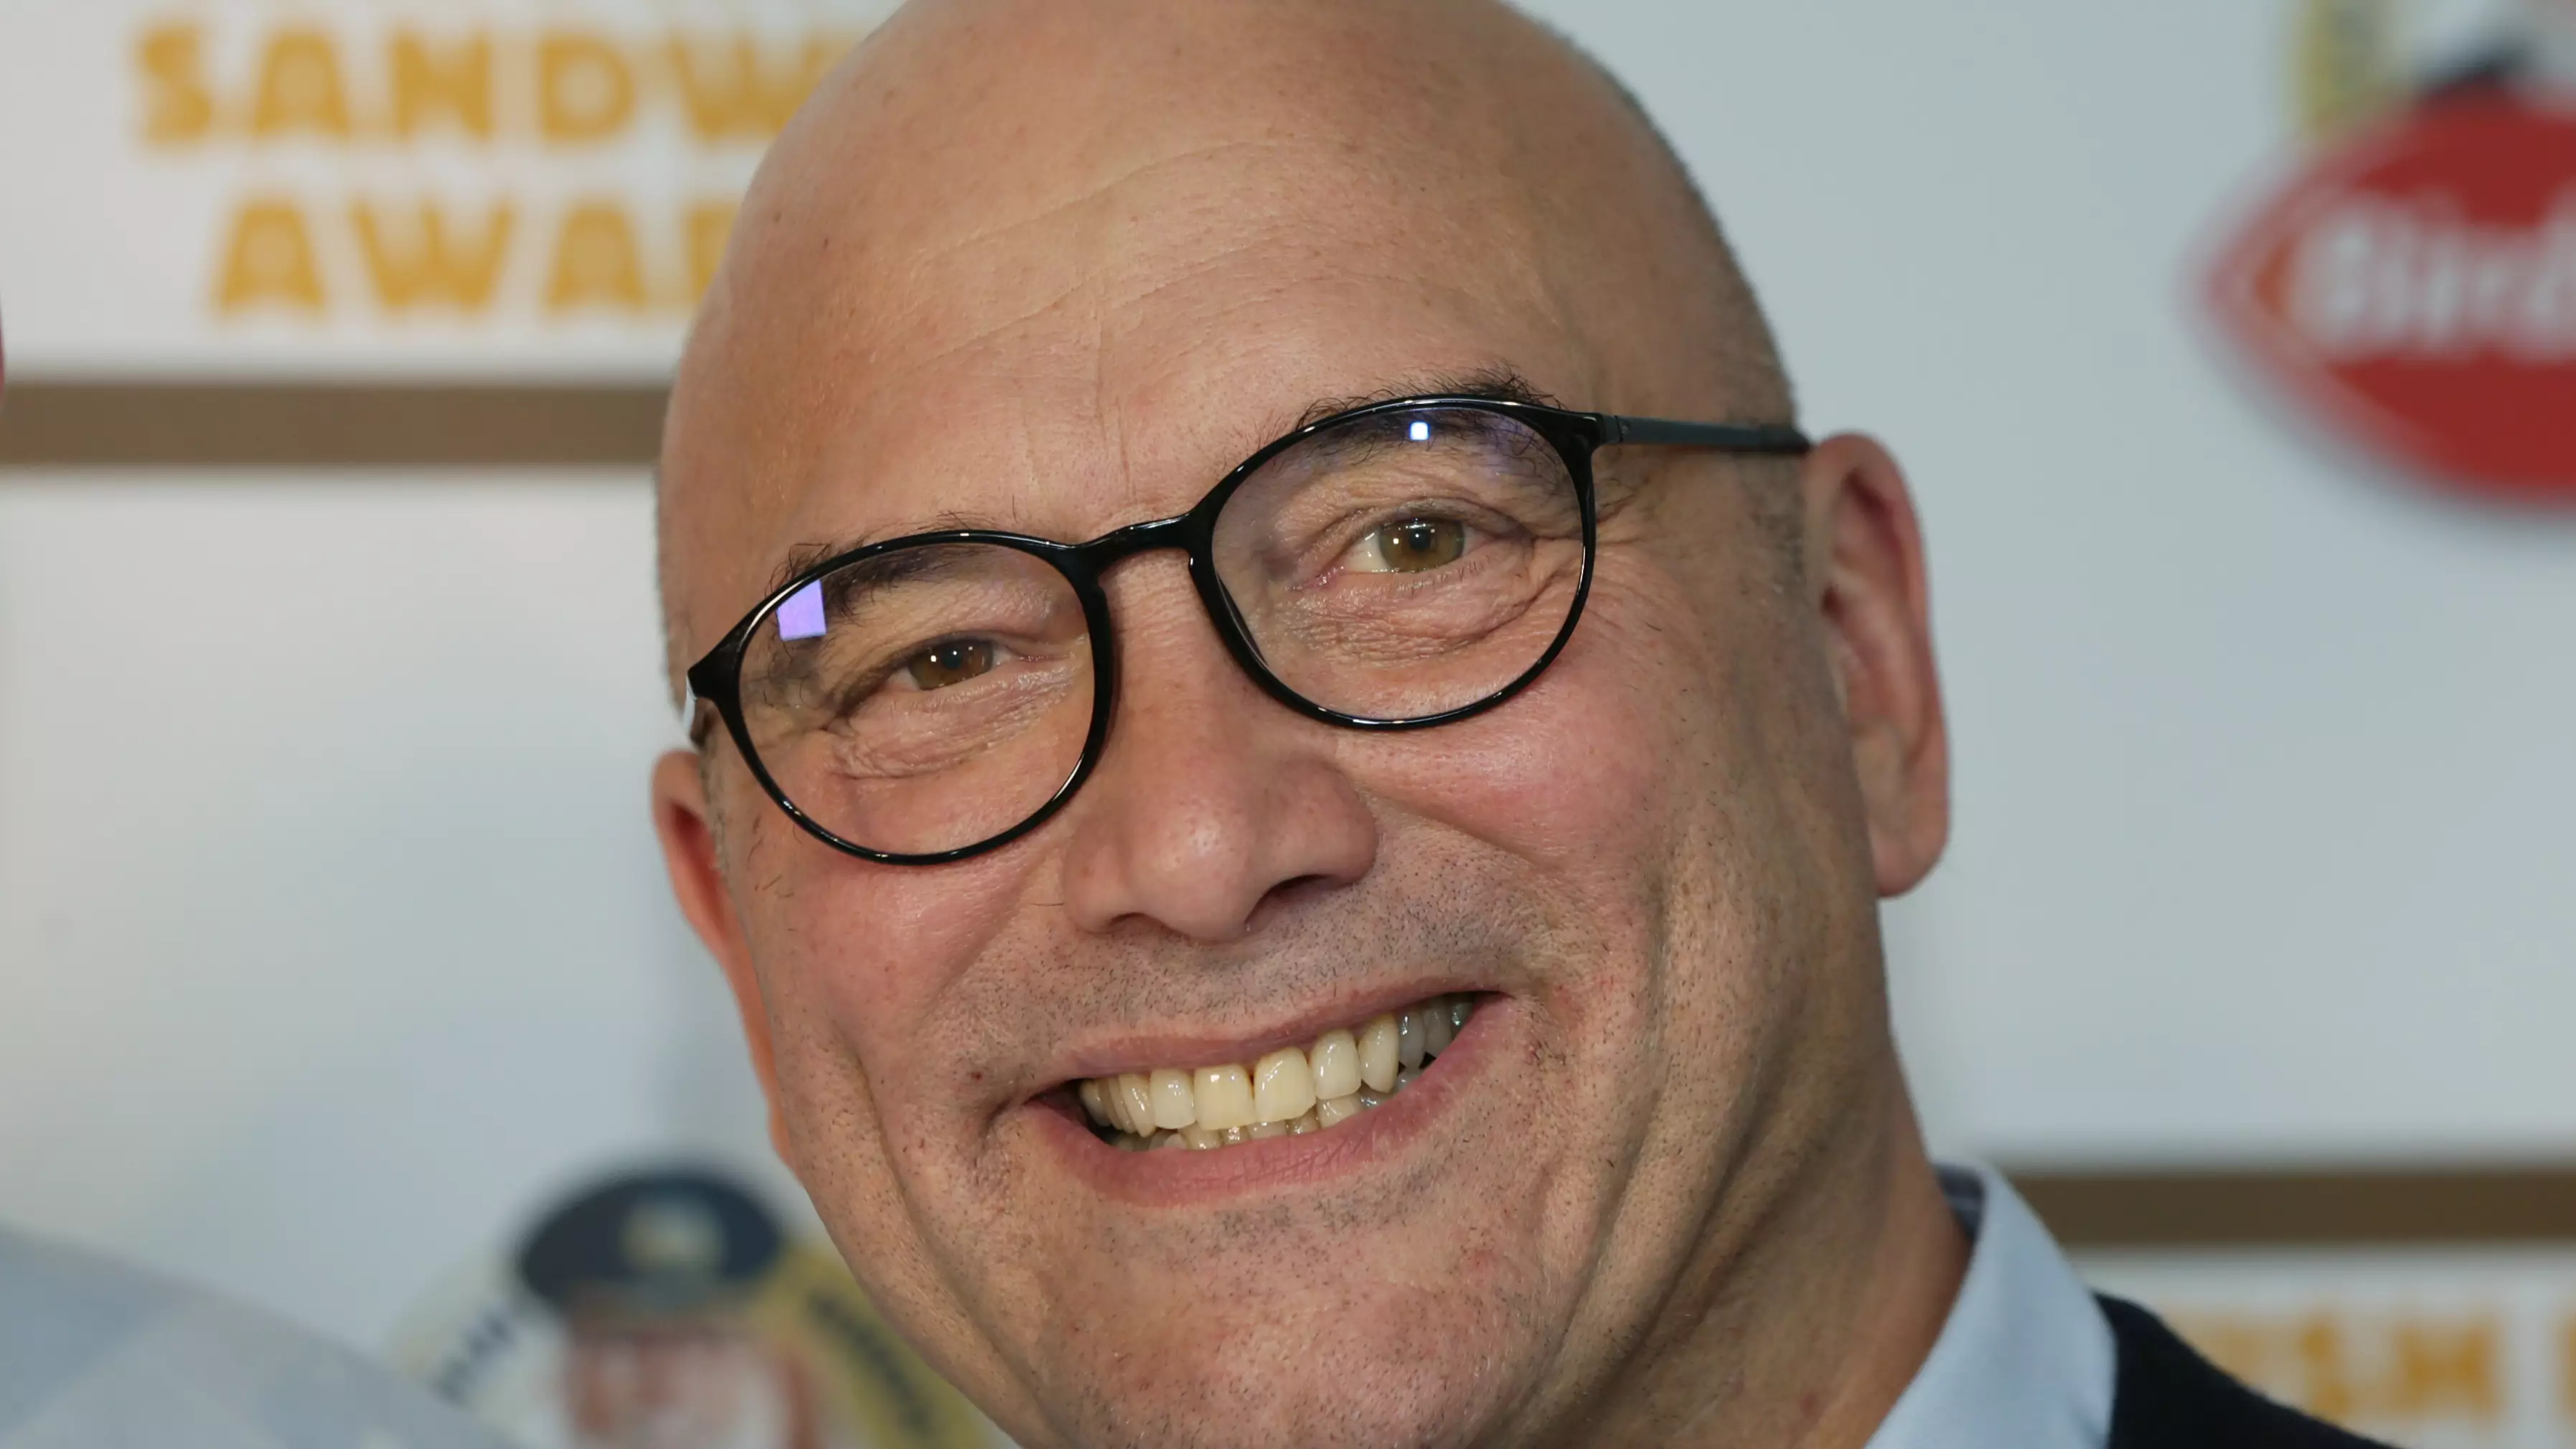 MasterChef’s Gregg Wallace Shows Off His Abs After Recent Transformation